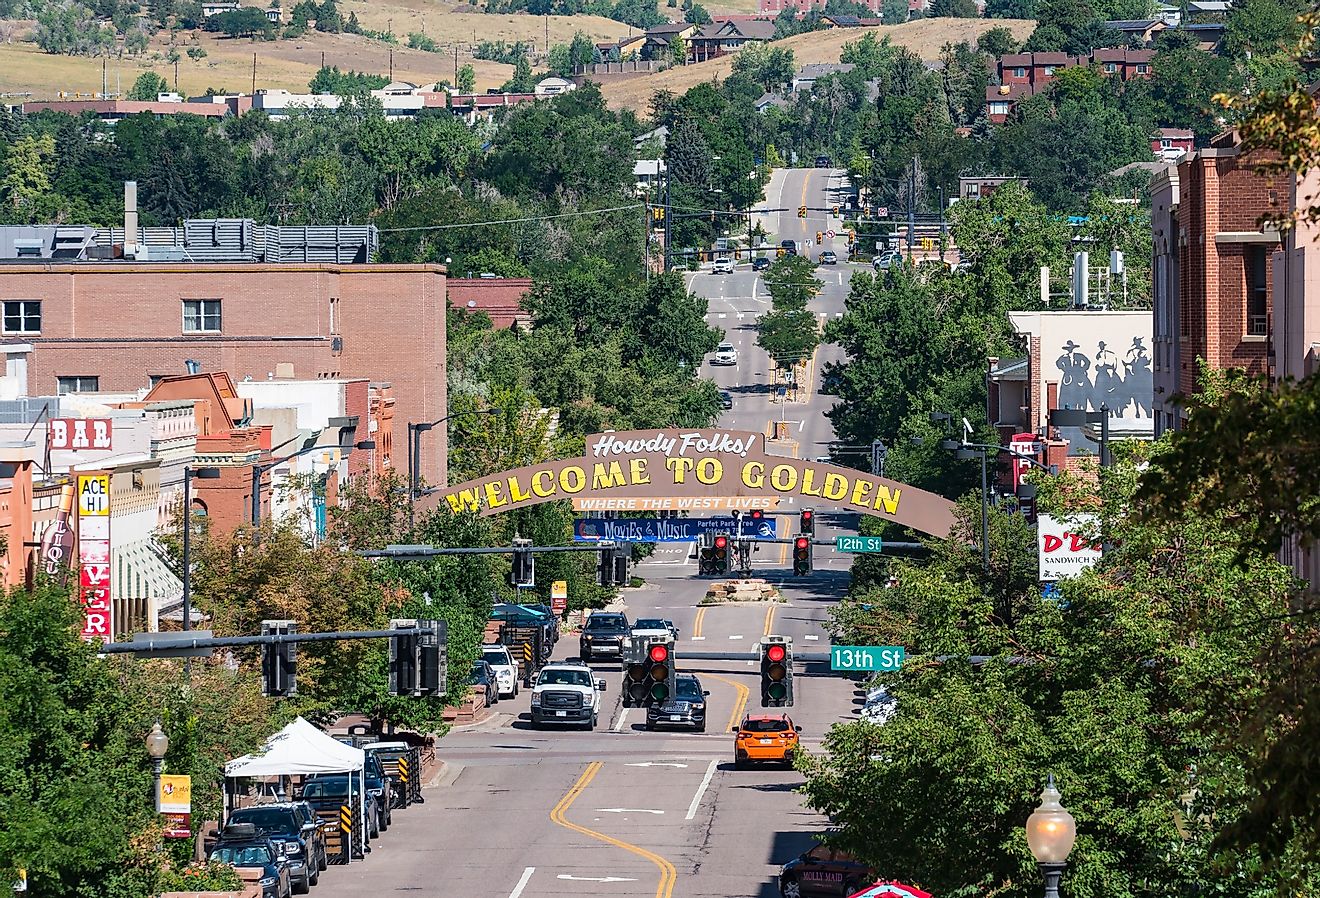 Welcome to Golden sign along Washington street in Golden, Colorado. Image credit Paul Brady Photography via Shutterstock